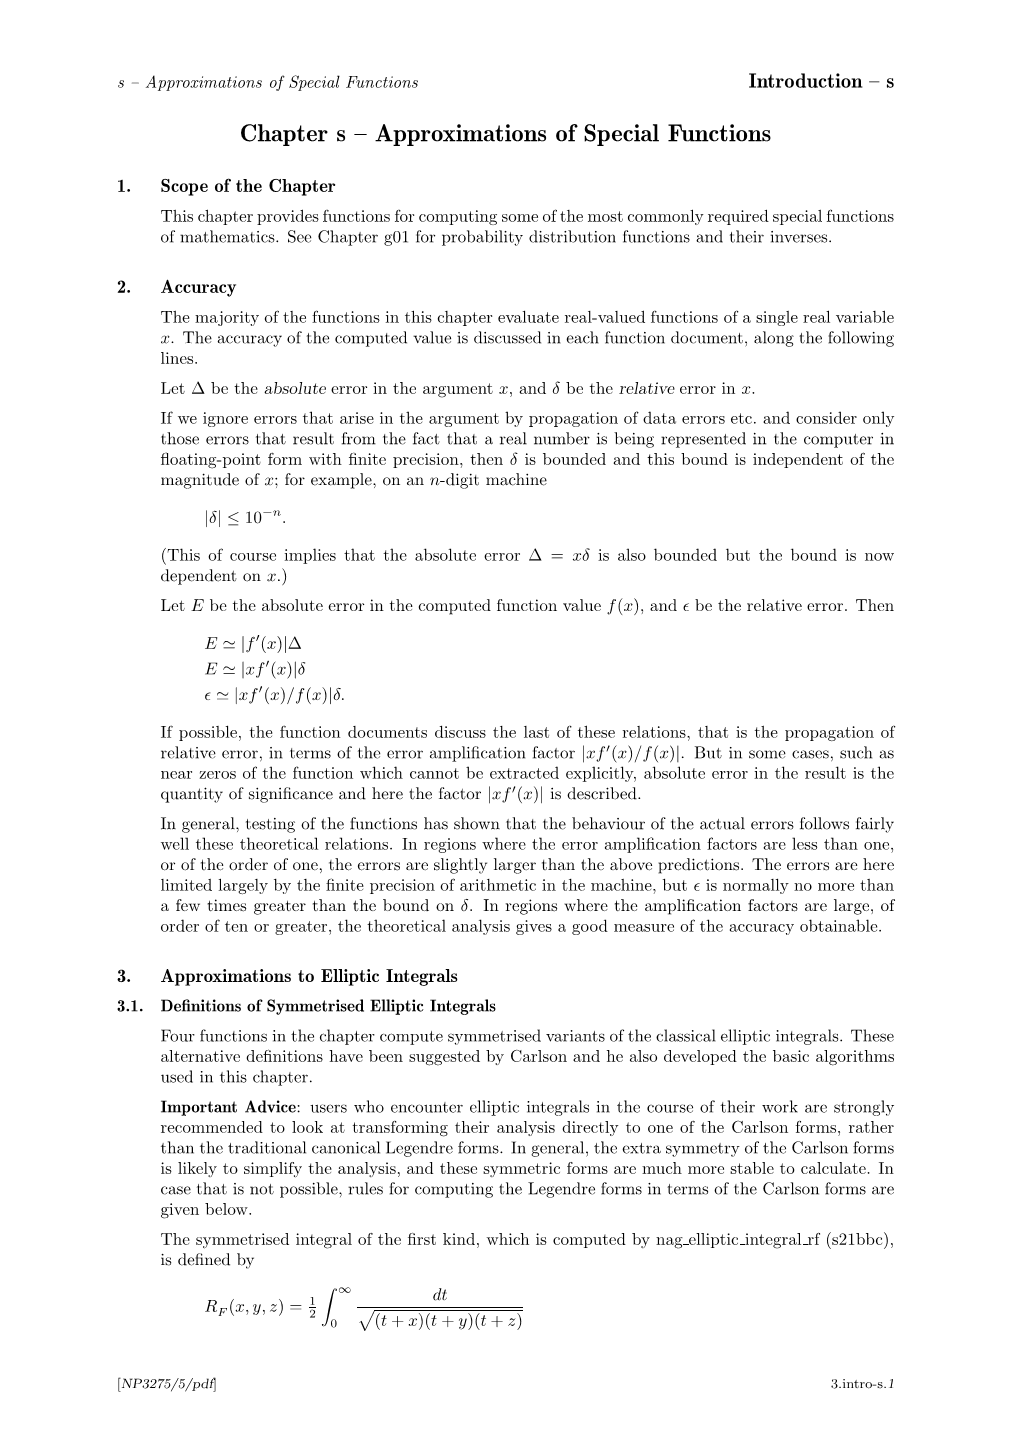 Chapter S – Approximations of Special Functions